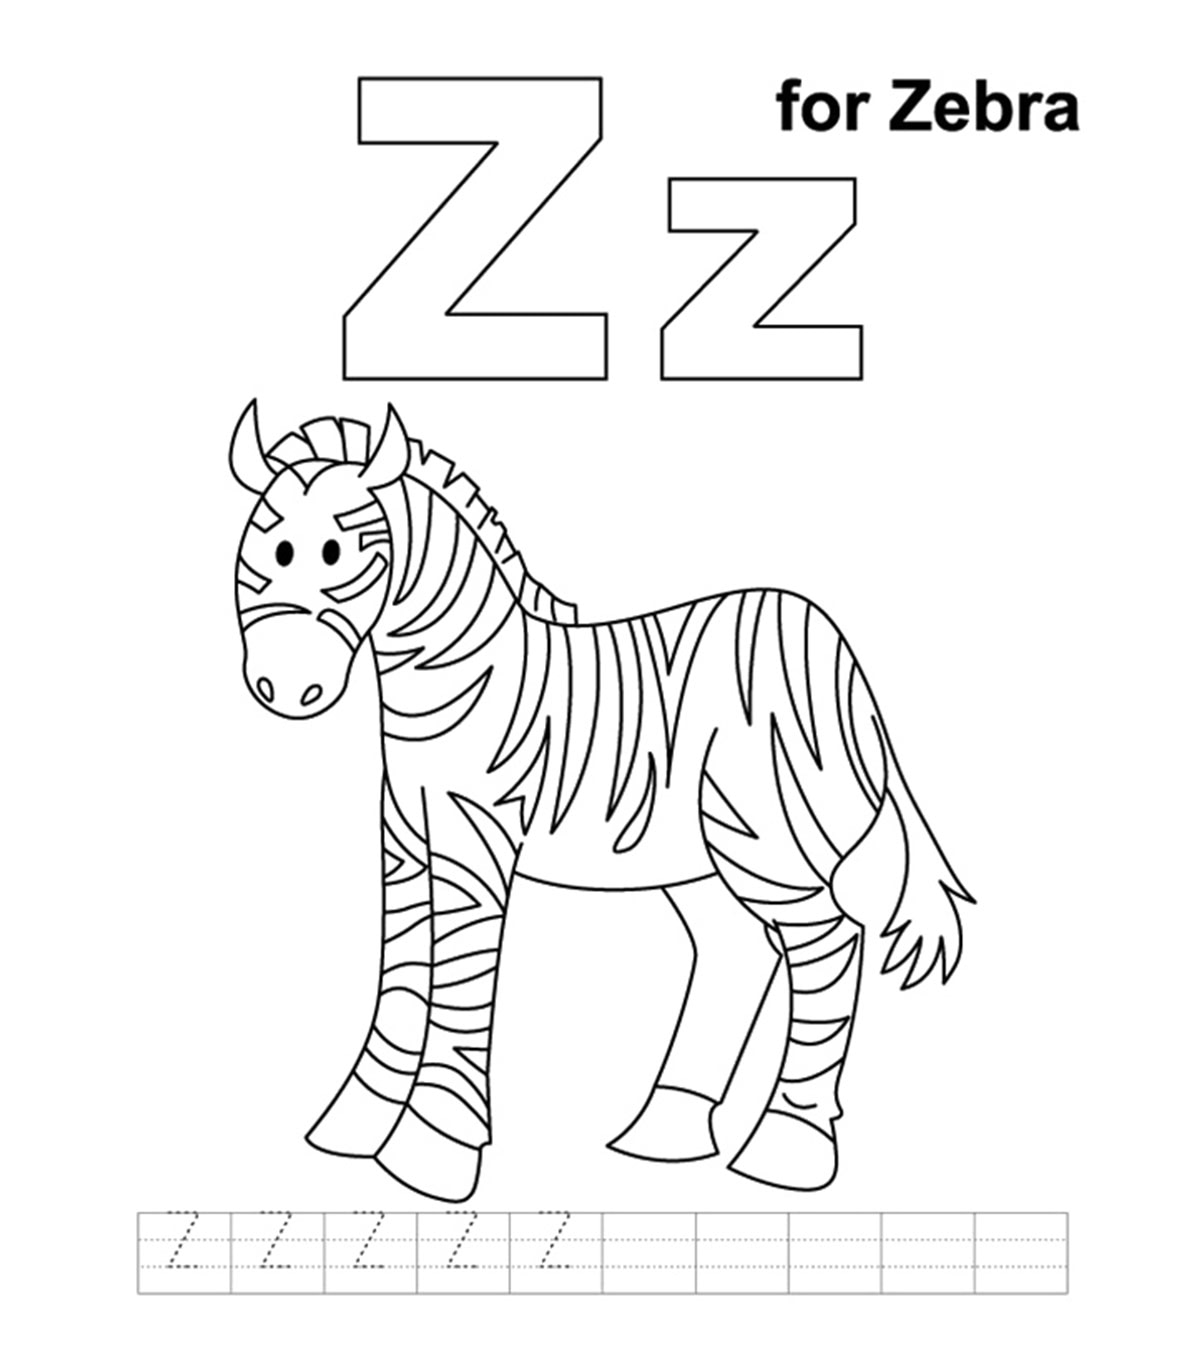 Eductional Coloring Pages - MomJunction